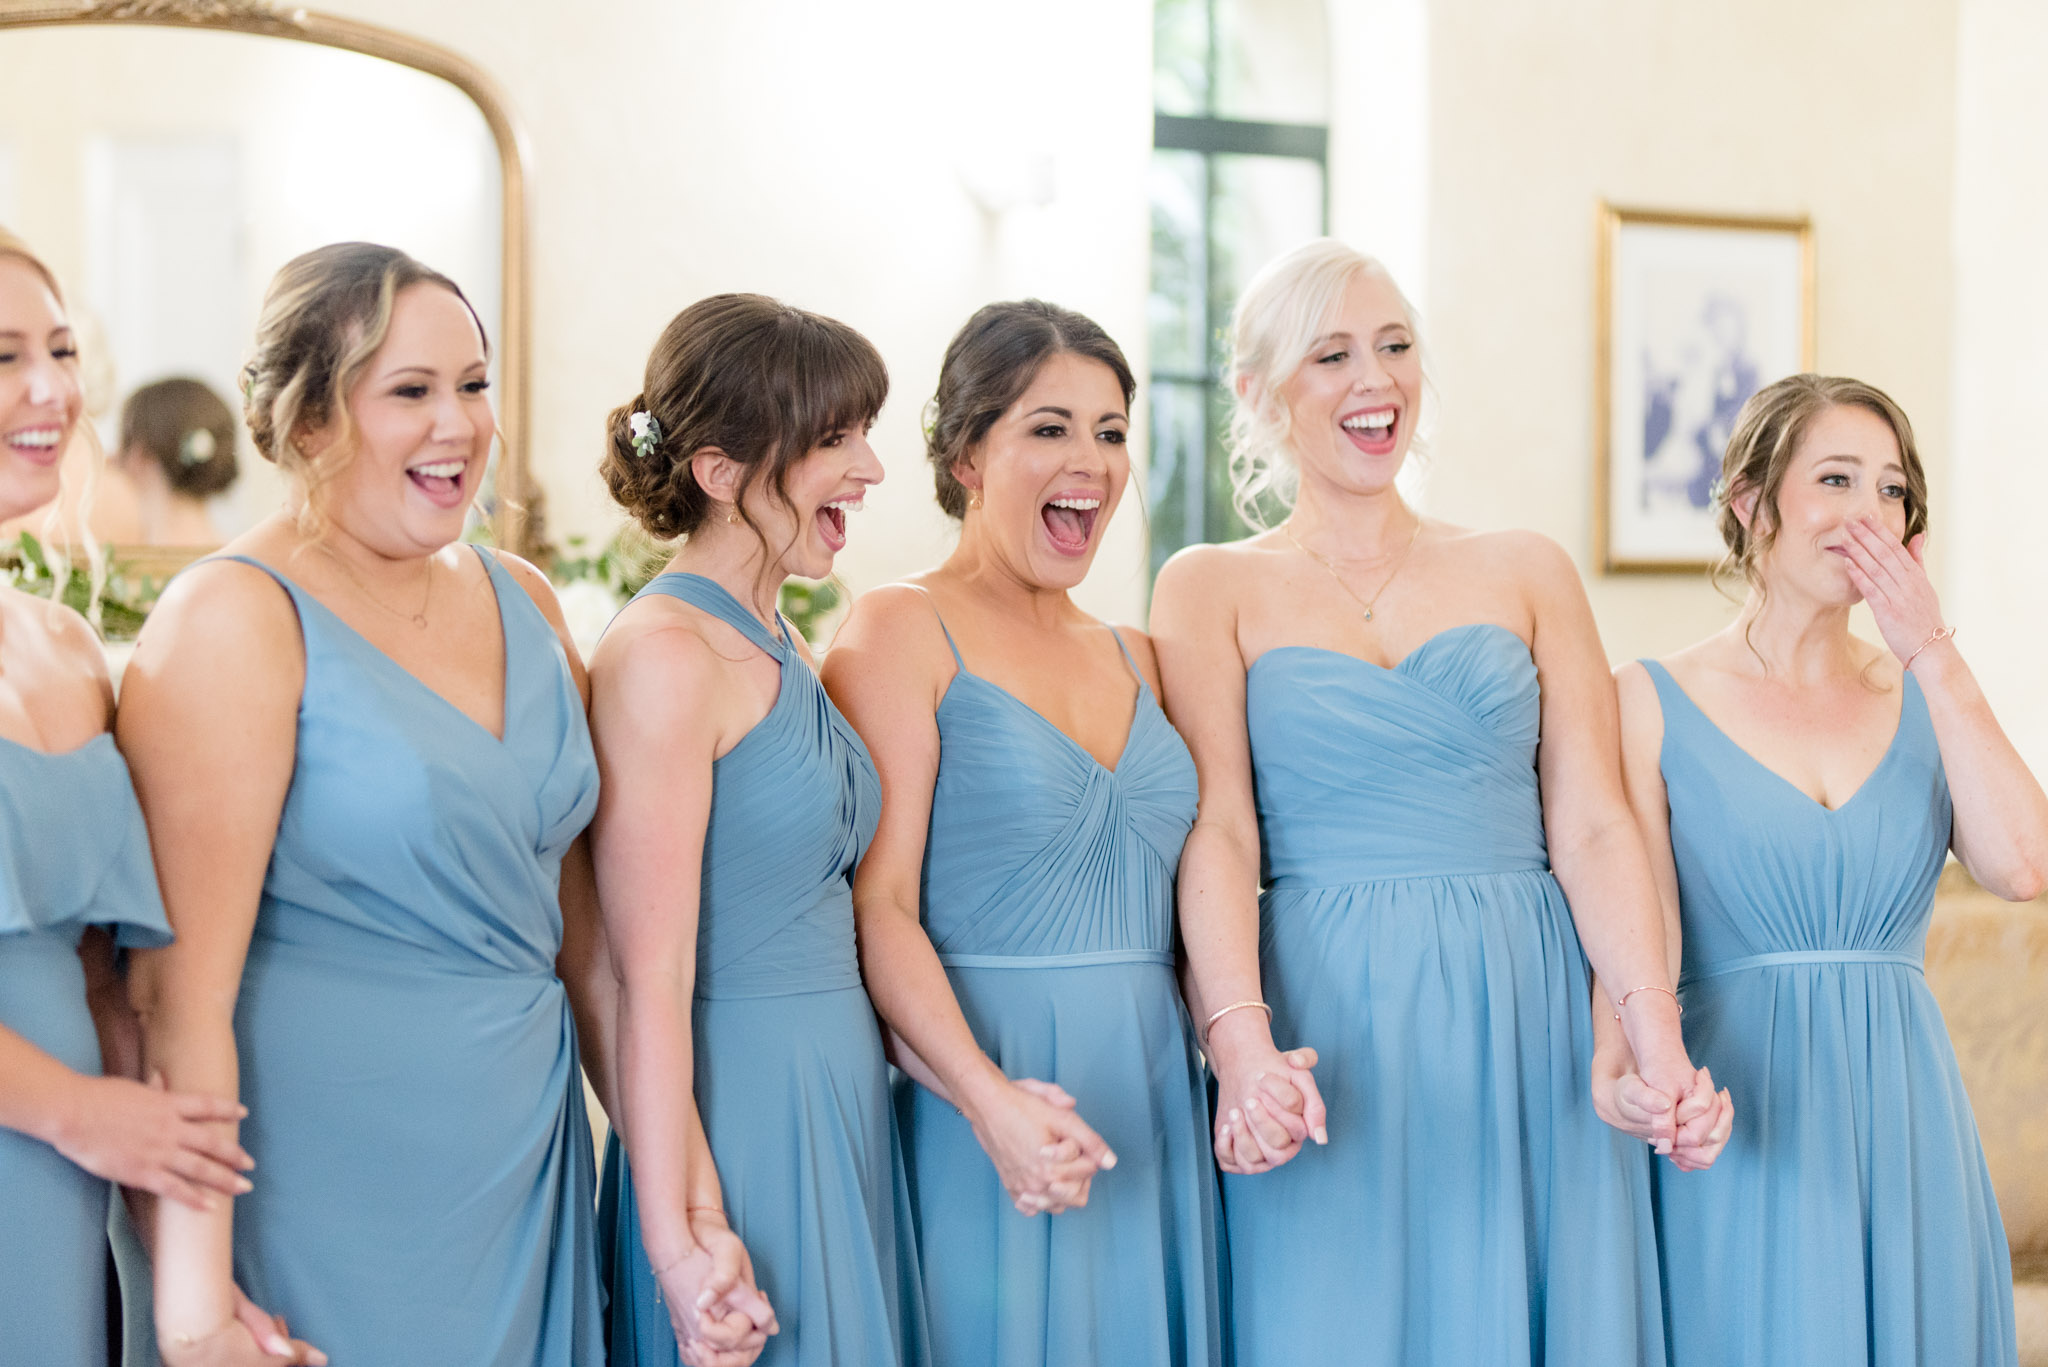 Bridesmaids smile as they see bride.